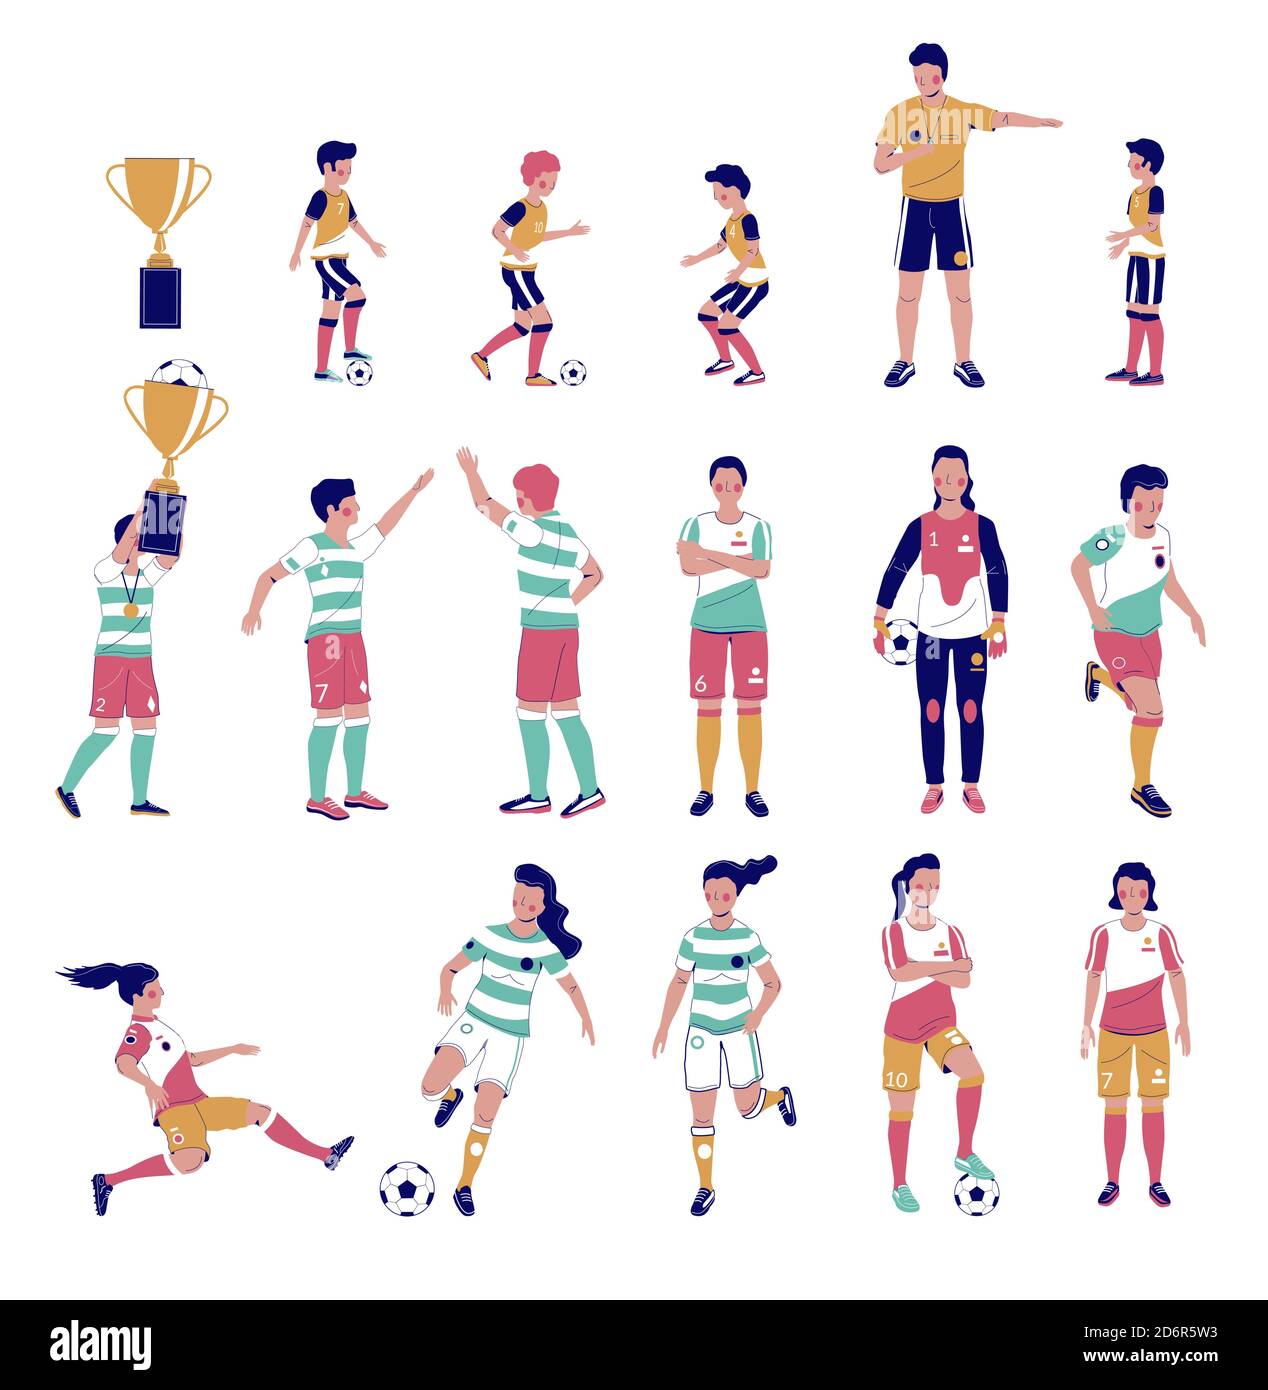 Soccer player set, flat vector isolated illustration. Kids, adults playing football, kicking the ball, holding gold cup. Stock Vector